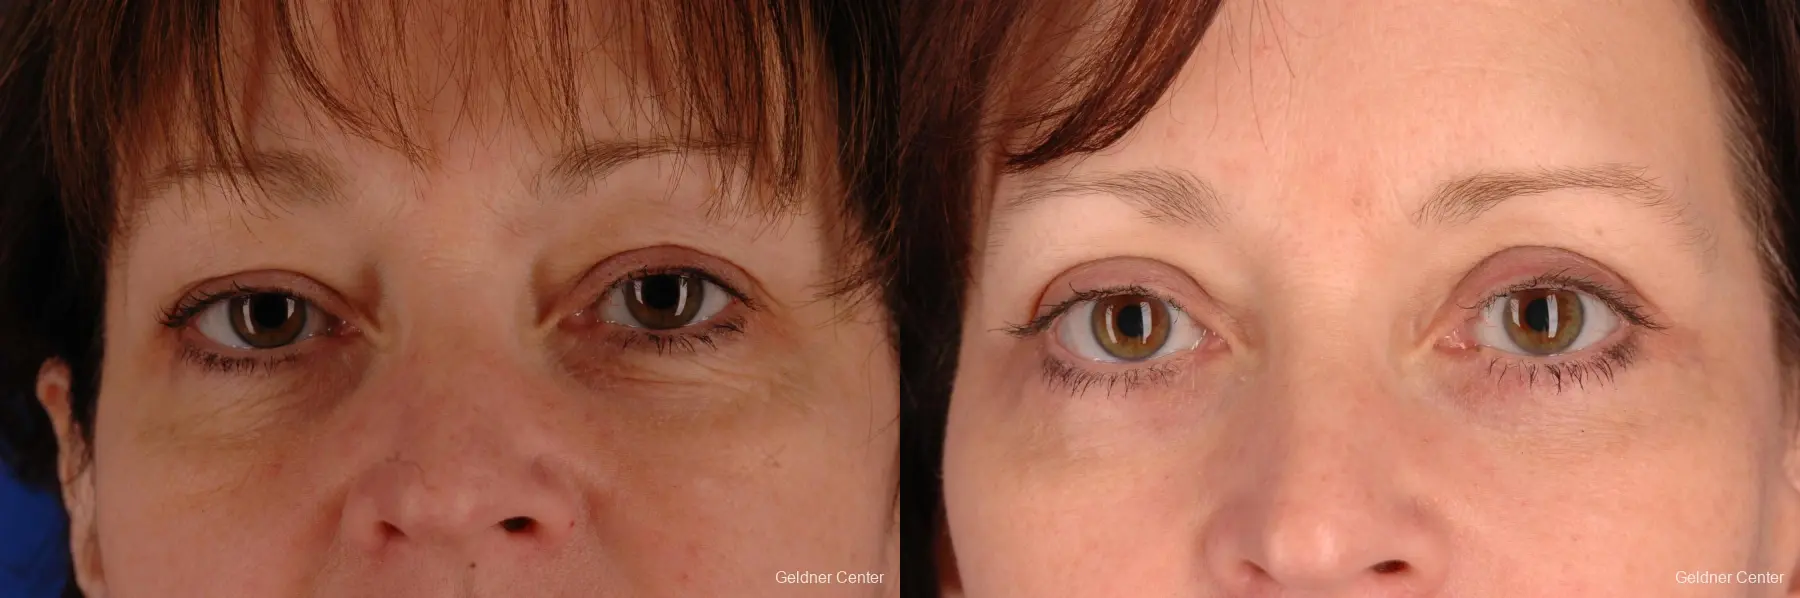 52 year old woman, lower blepharoplasty - Before and After